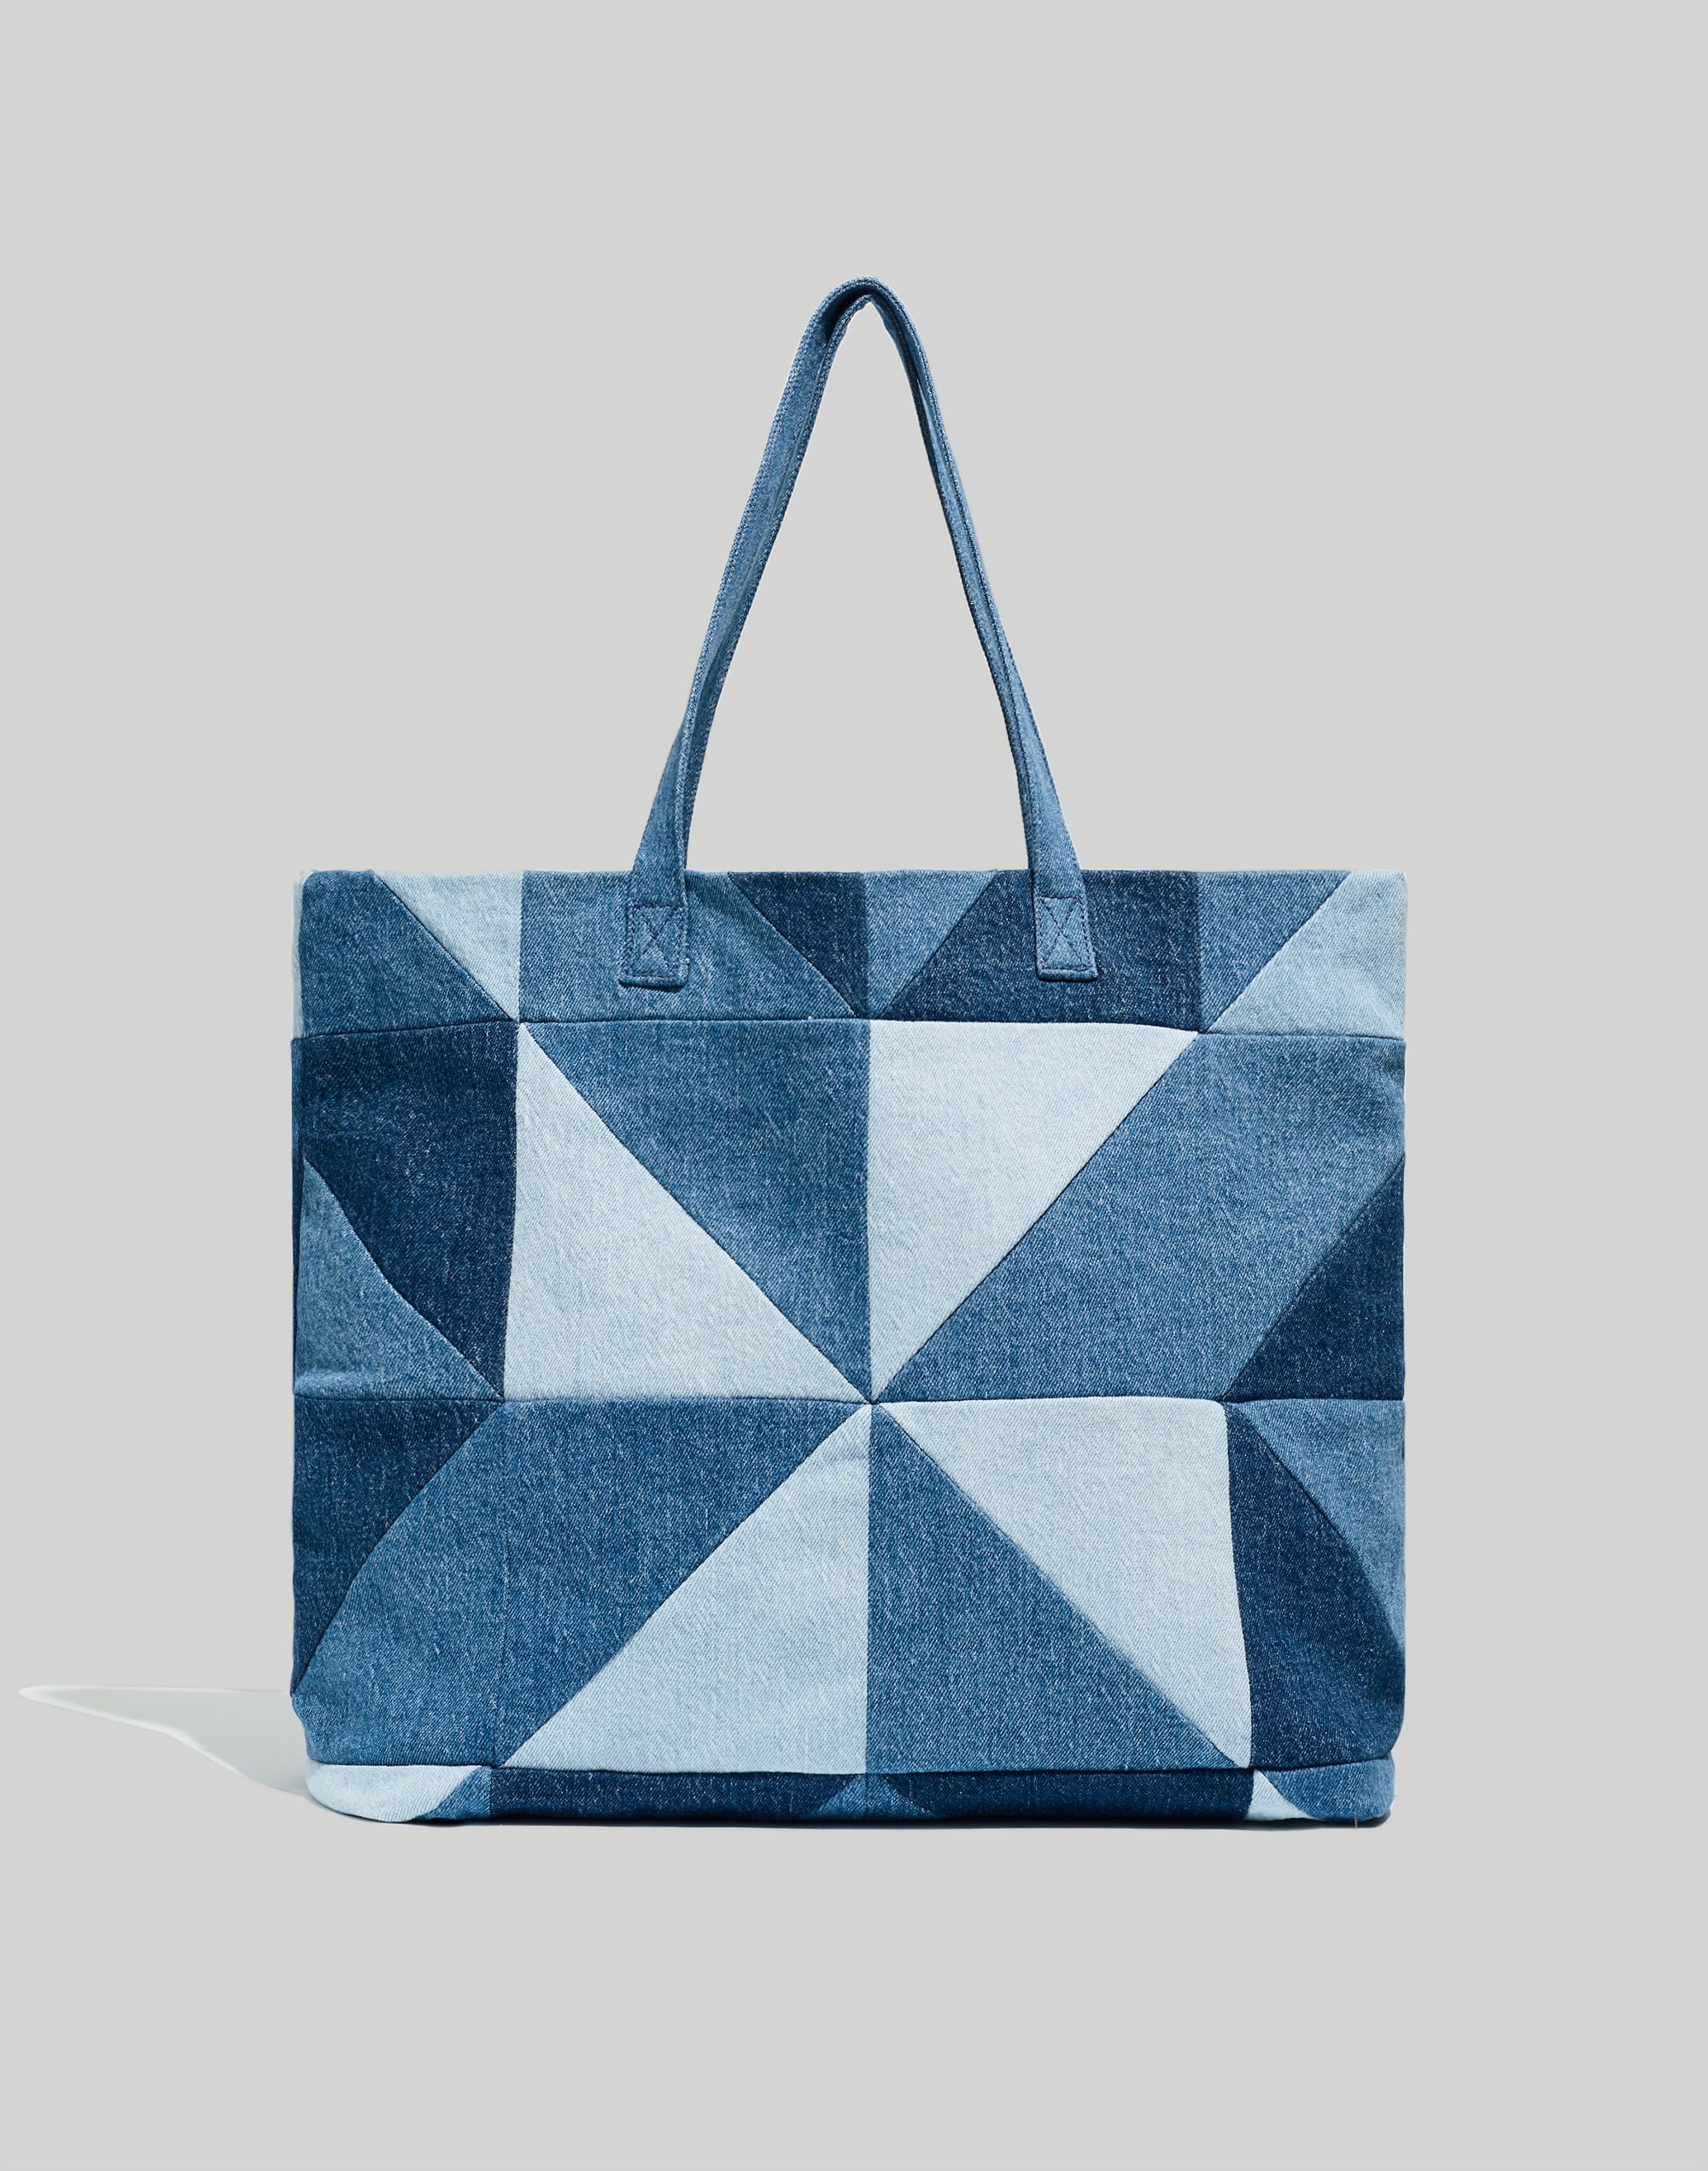 PATCHWORK TOTE BAG Denim Purse Patterned Lining Purchase 